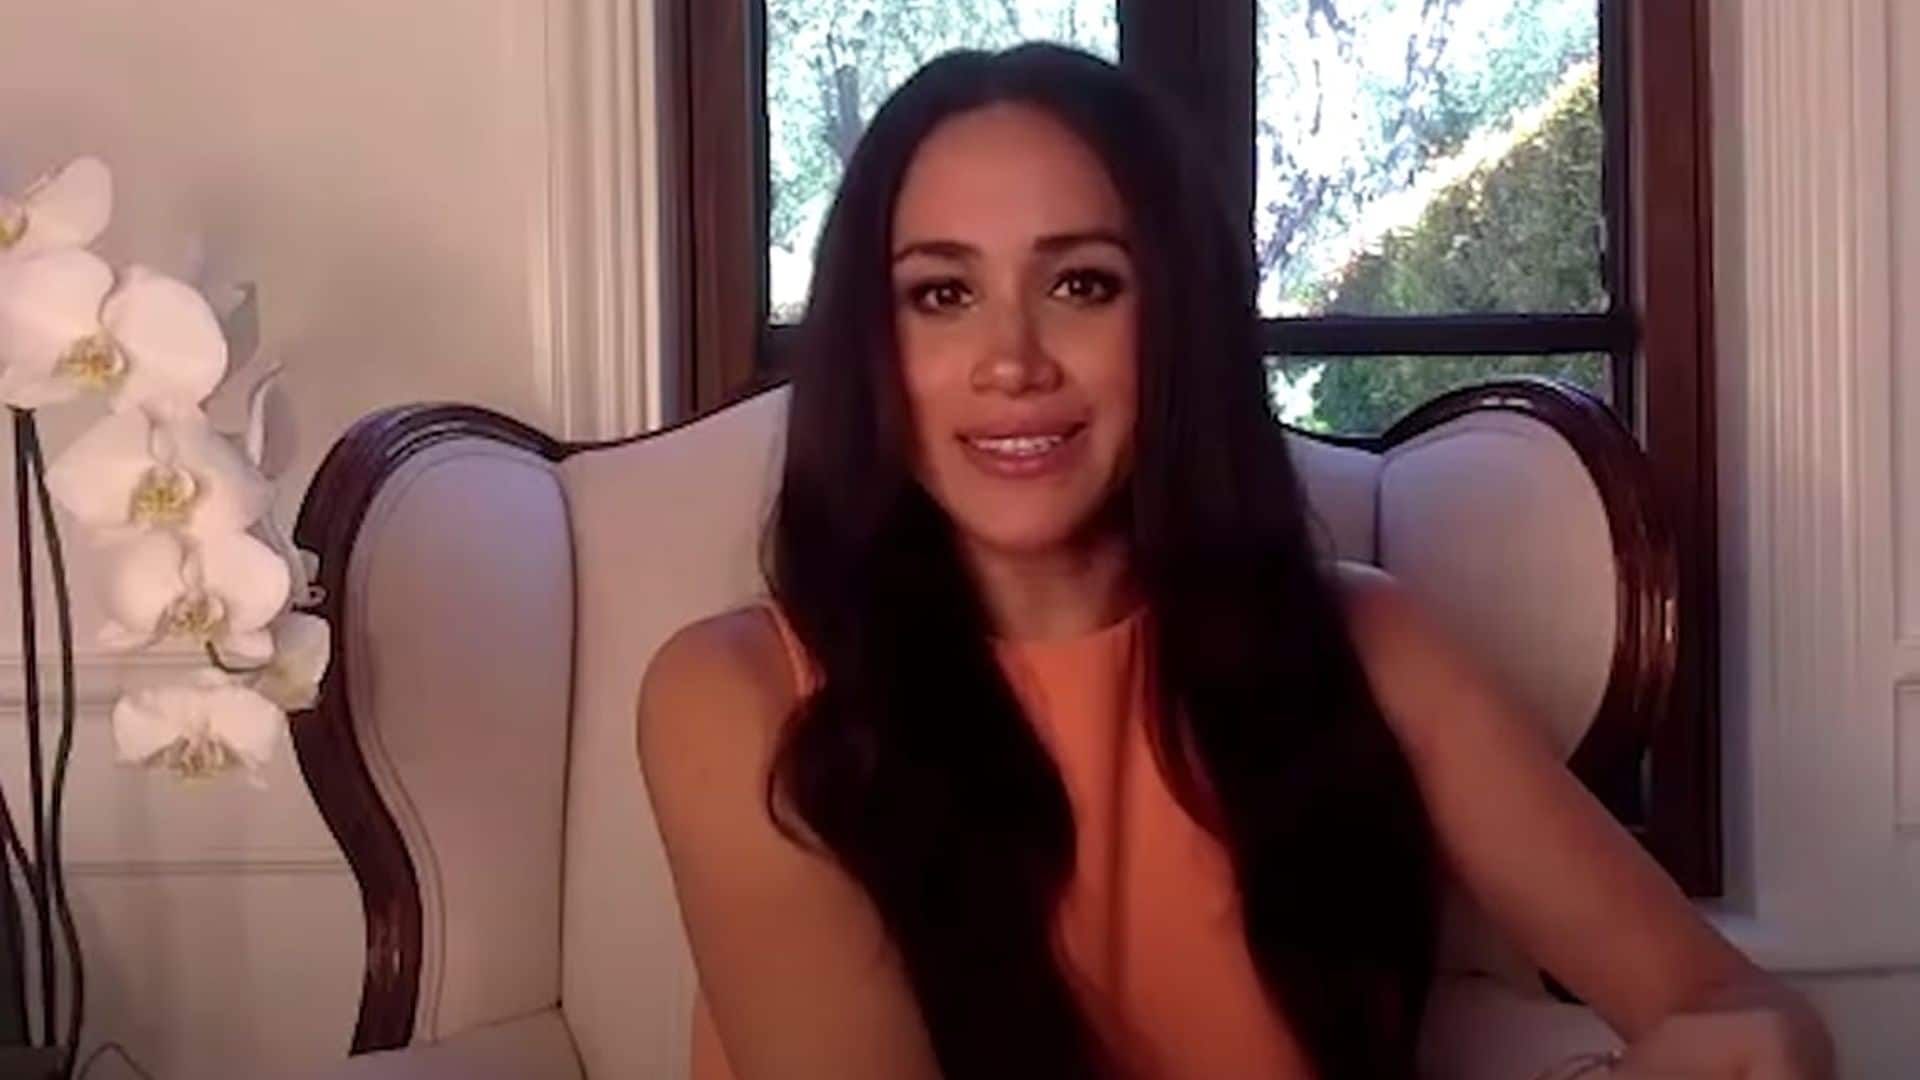 Meghan Markle says returning to U.S. after royal life was ‘devastating’ in new interview